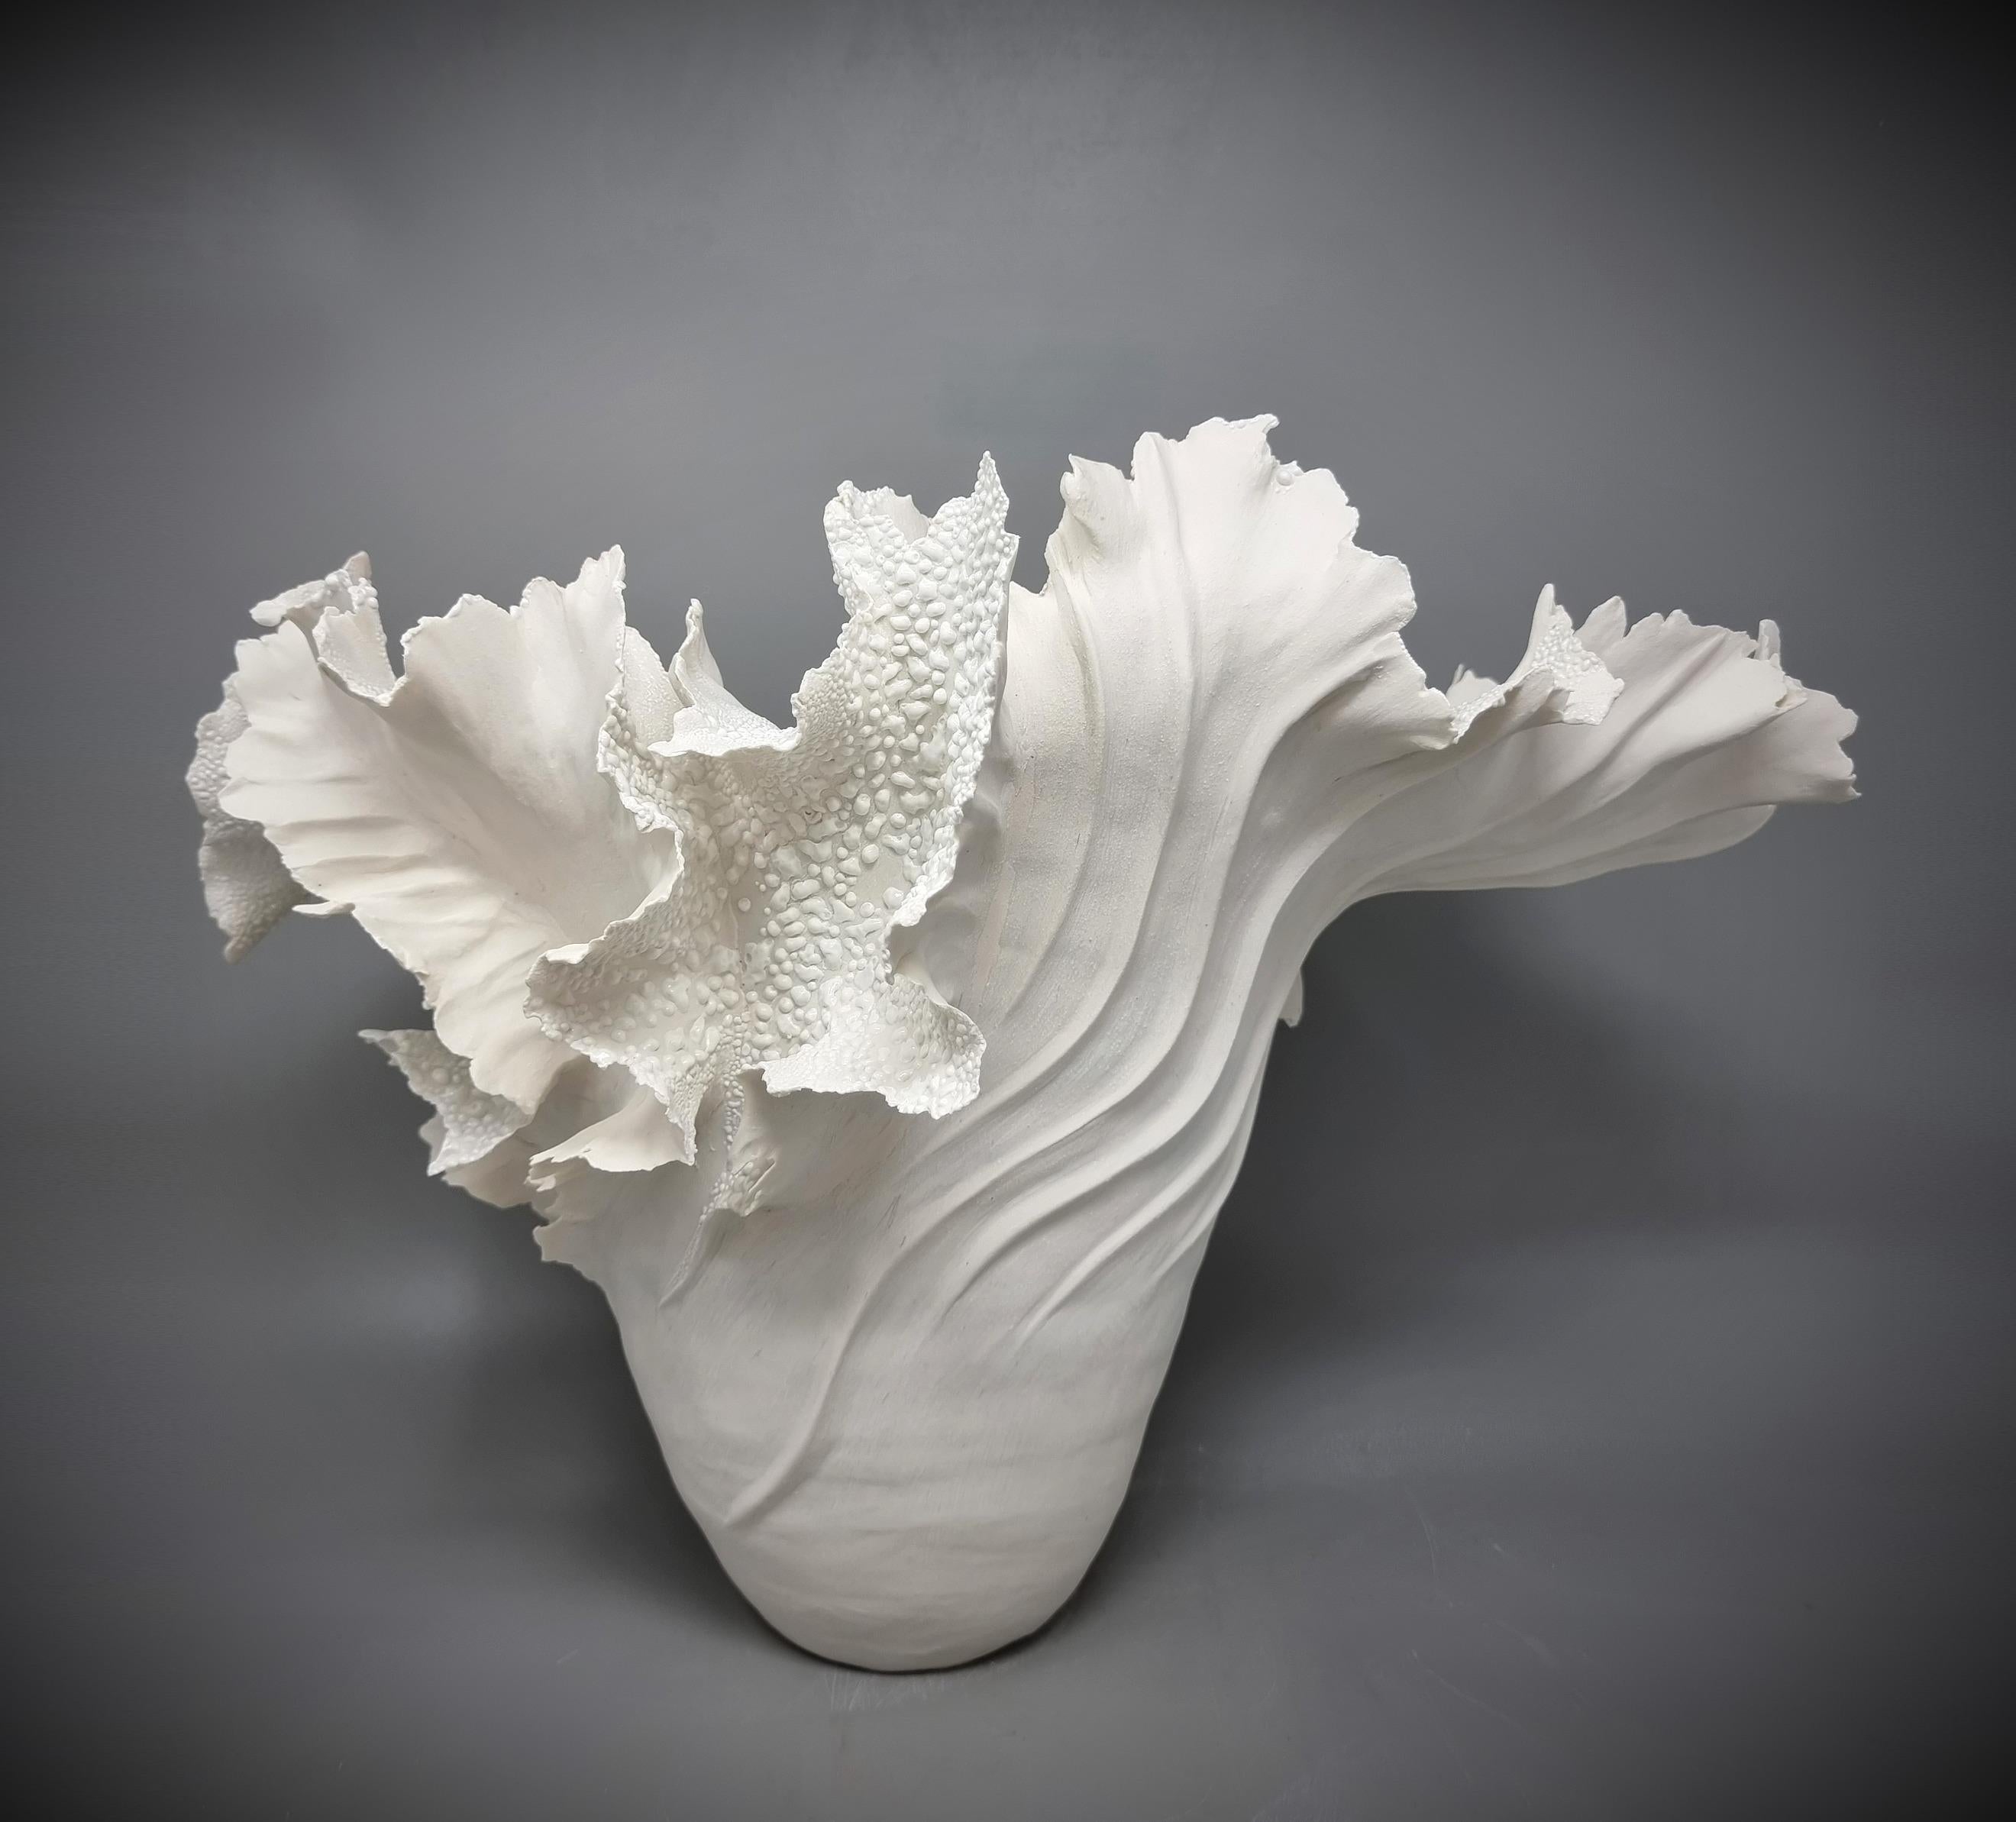 Handbuilt paperporcelain sculpture in shape of a vase. This is from the 